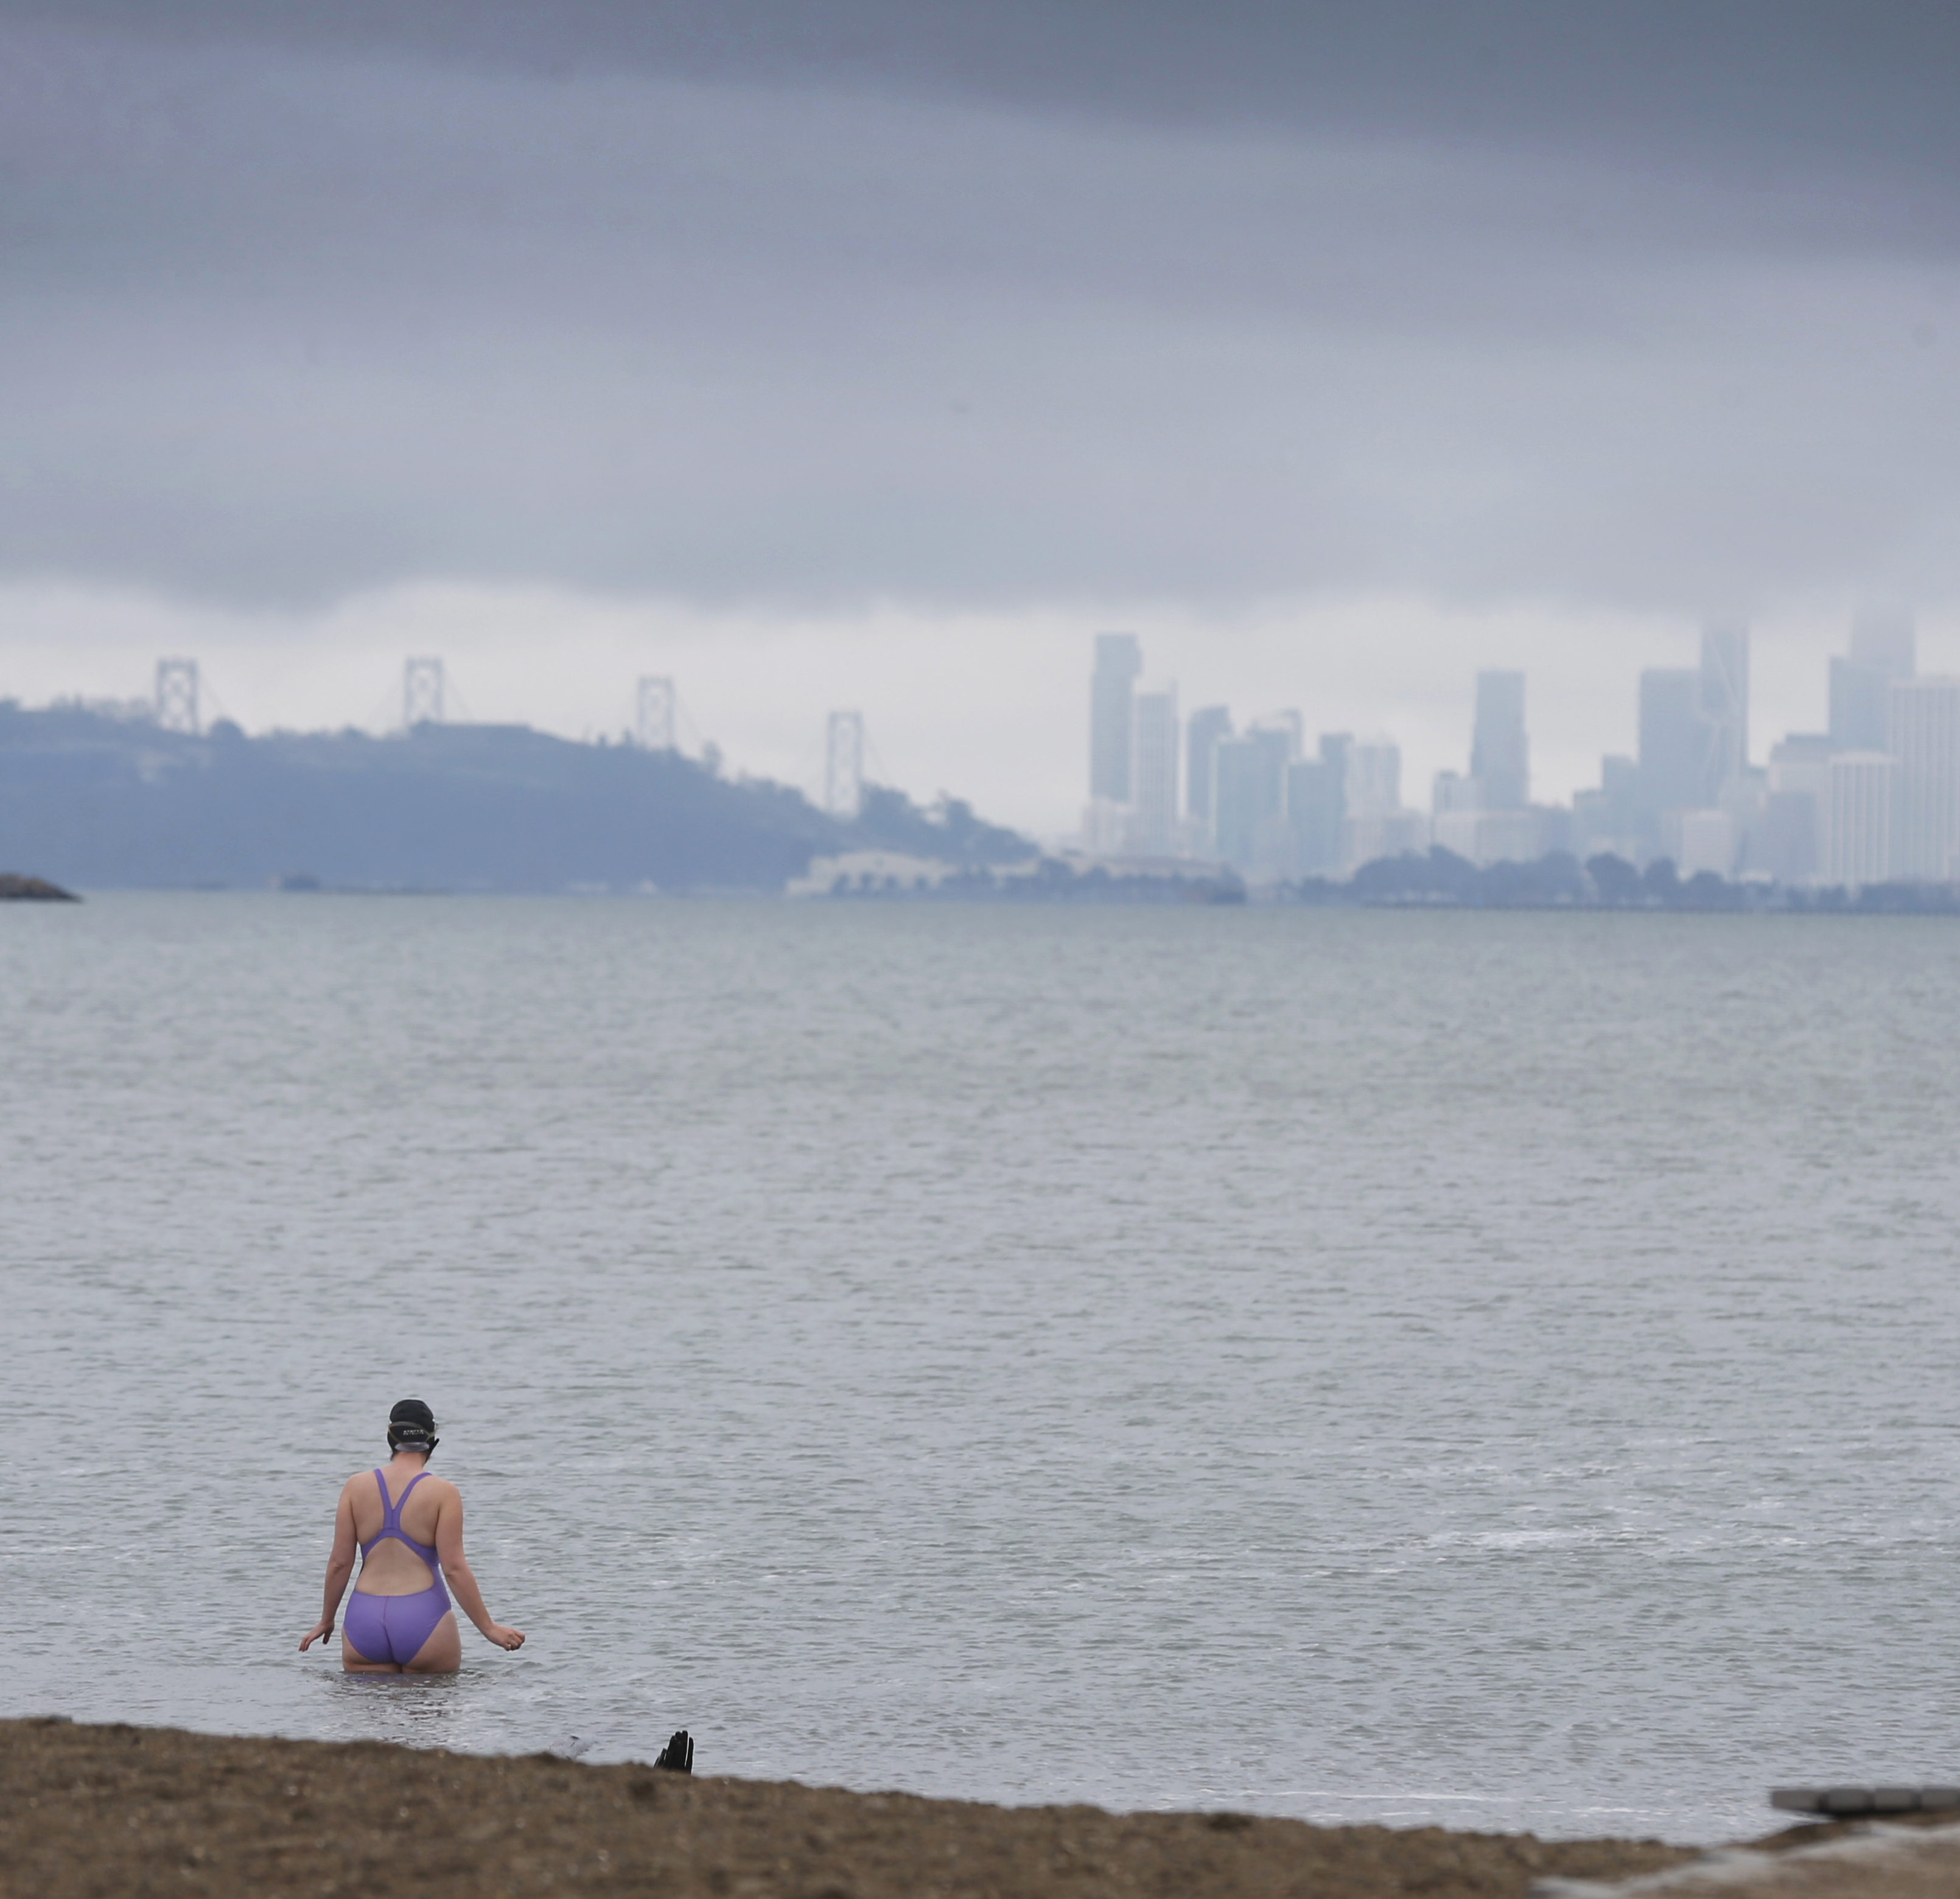 A person in a swimsuit sits by the sea; a foggy city skyline with a bridge lurks in the background.